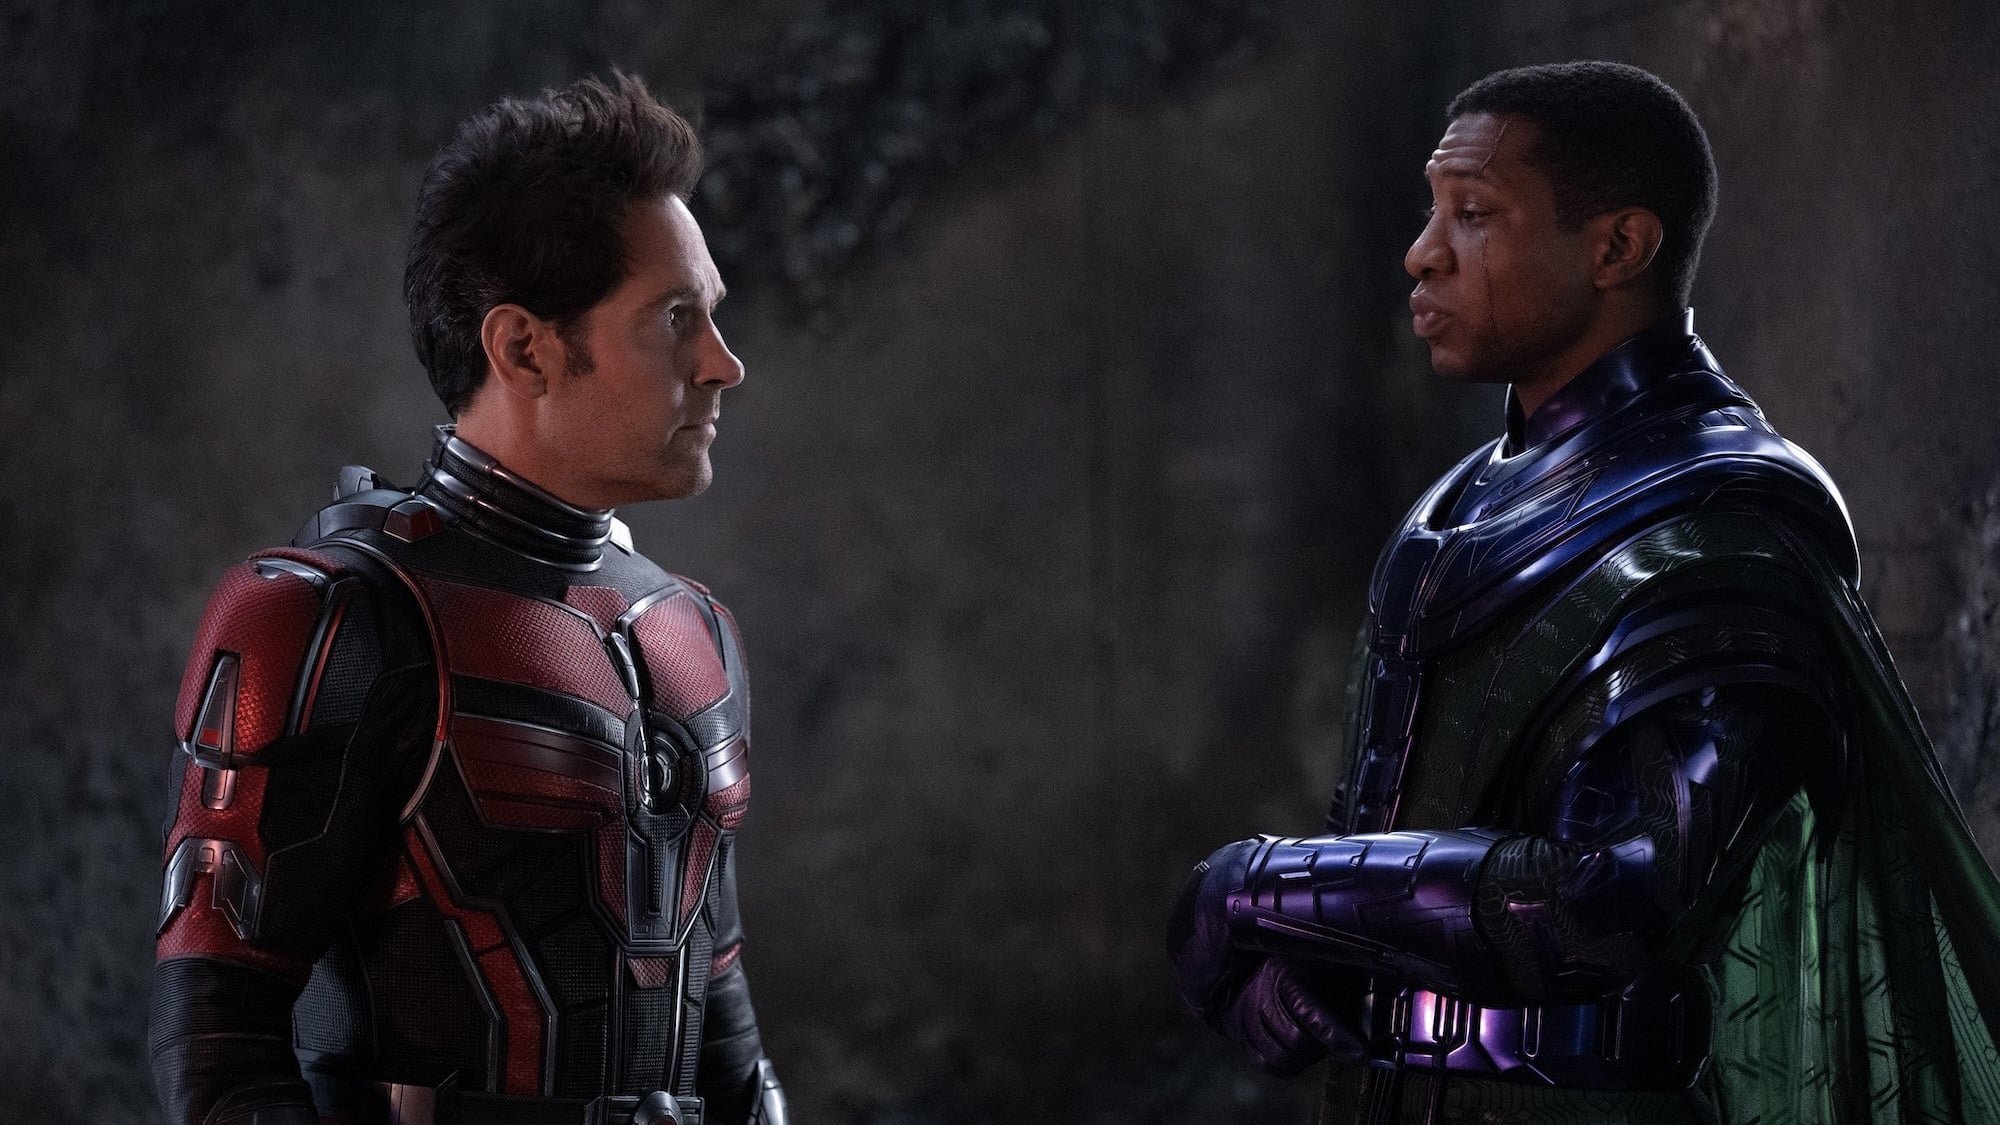 Only one Marvel film has performed worse. ‘Ant-Man and the Wasp: Quantumania’ is facing criticism or negative reactions